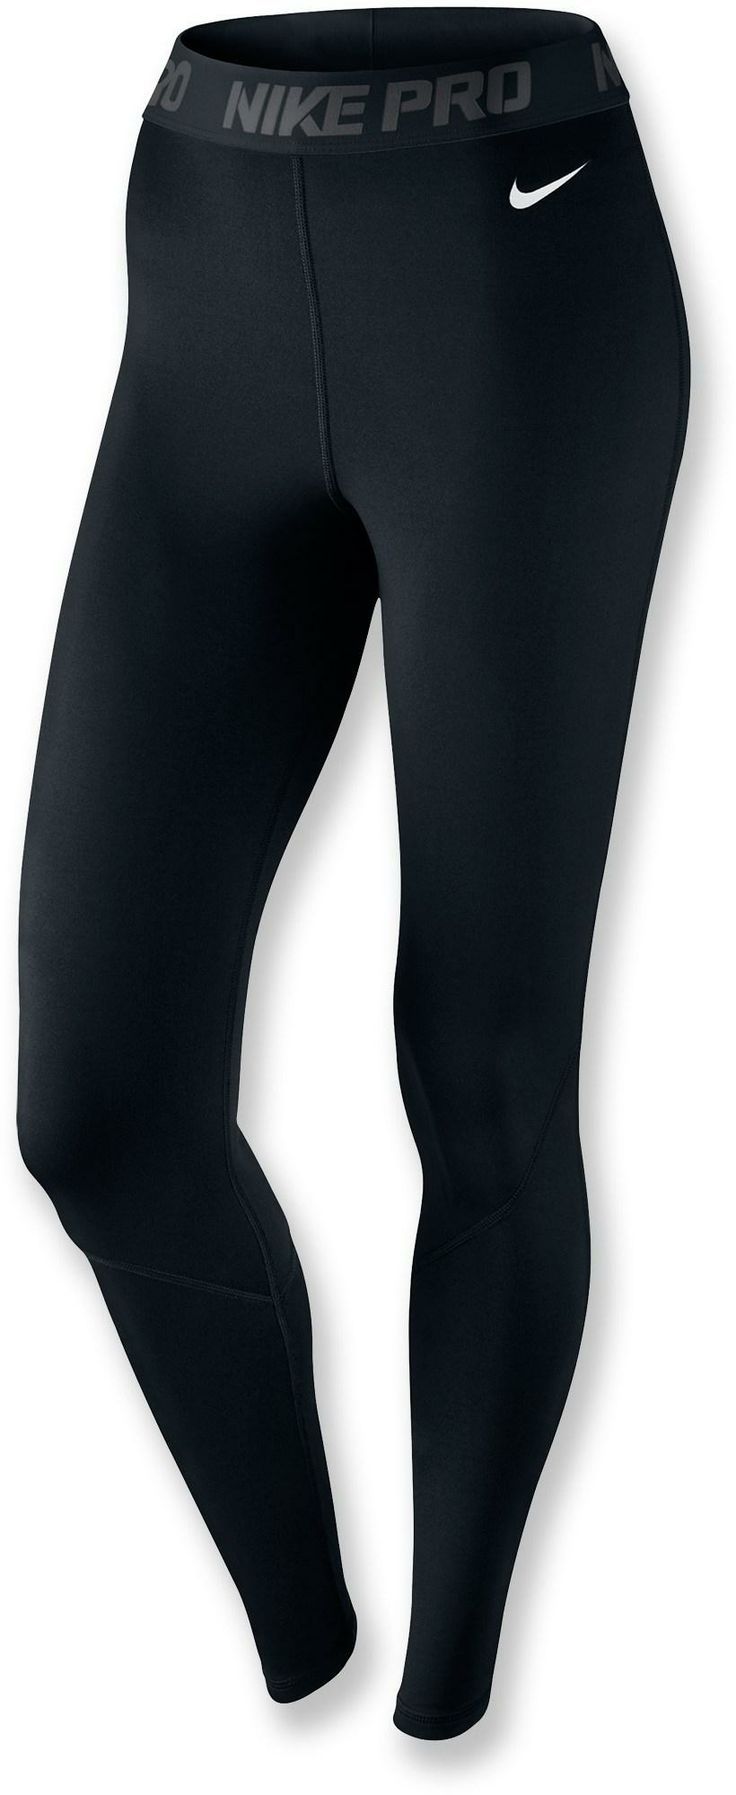 Perfect for cold weather runs. Nike Pro Hyperwarm Tights III - Women's.